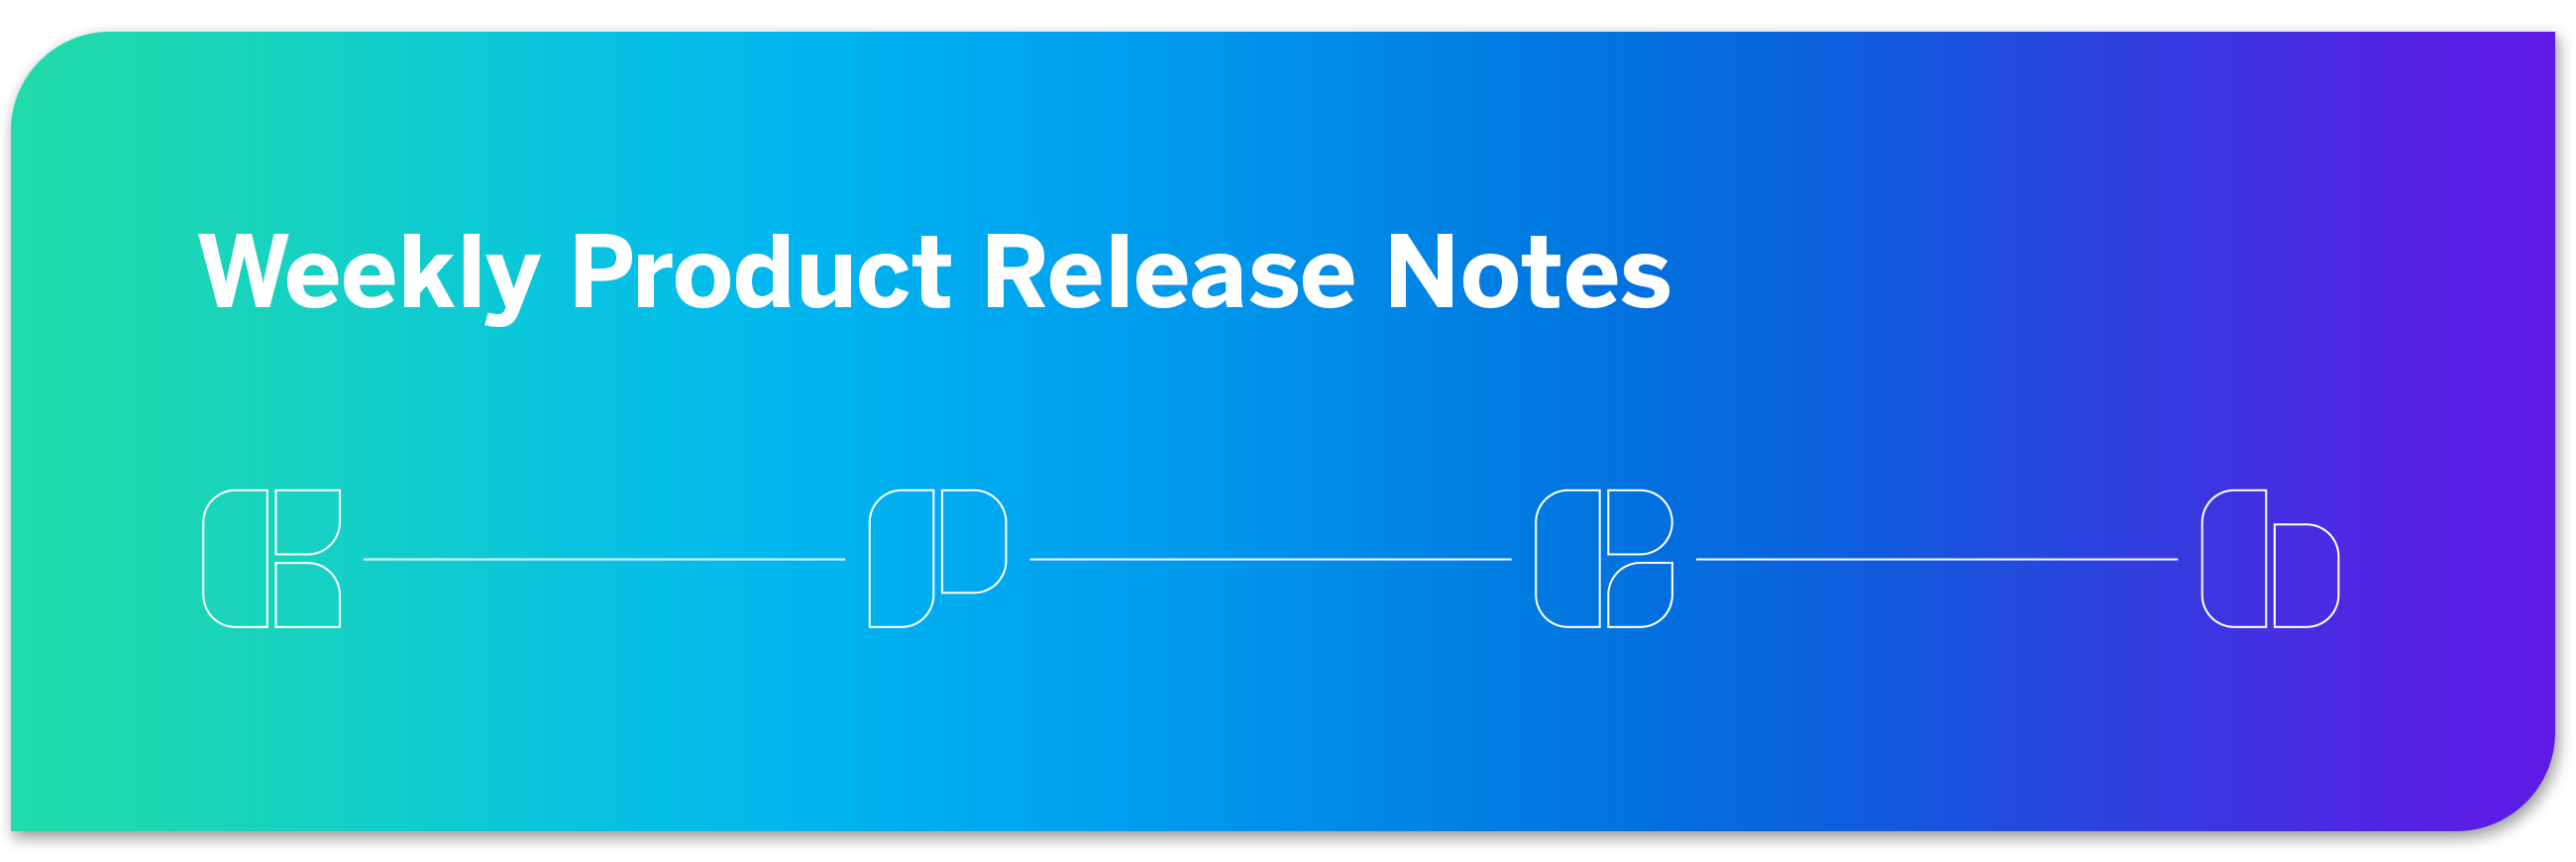 Weekly Product Release Notes Banner